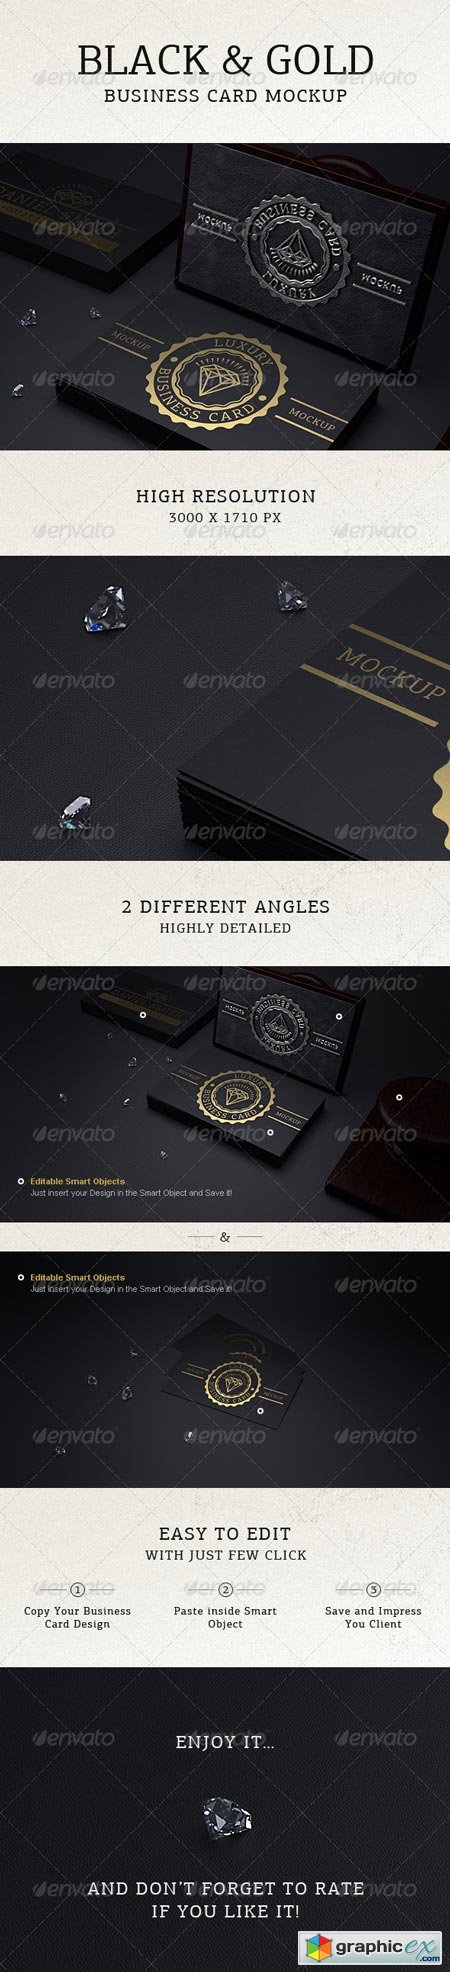 Photorealistic Black & Gold Business Card Mock Up 6400458